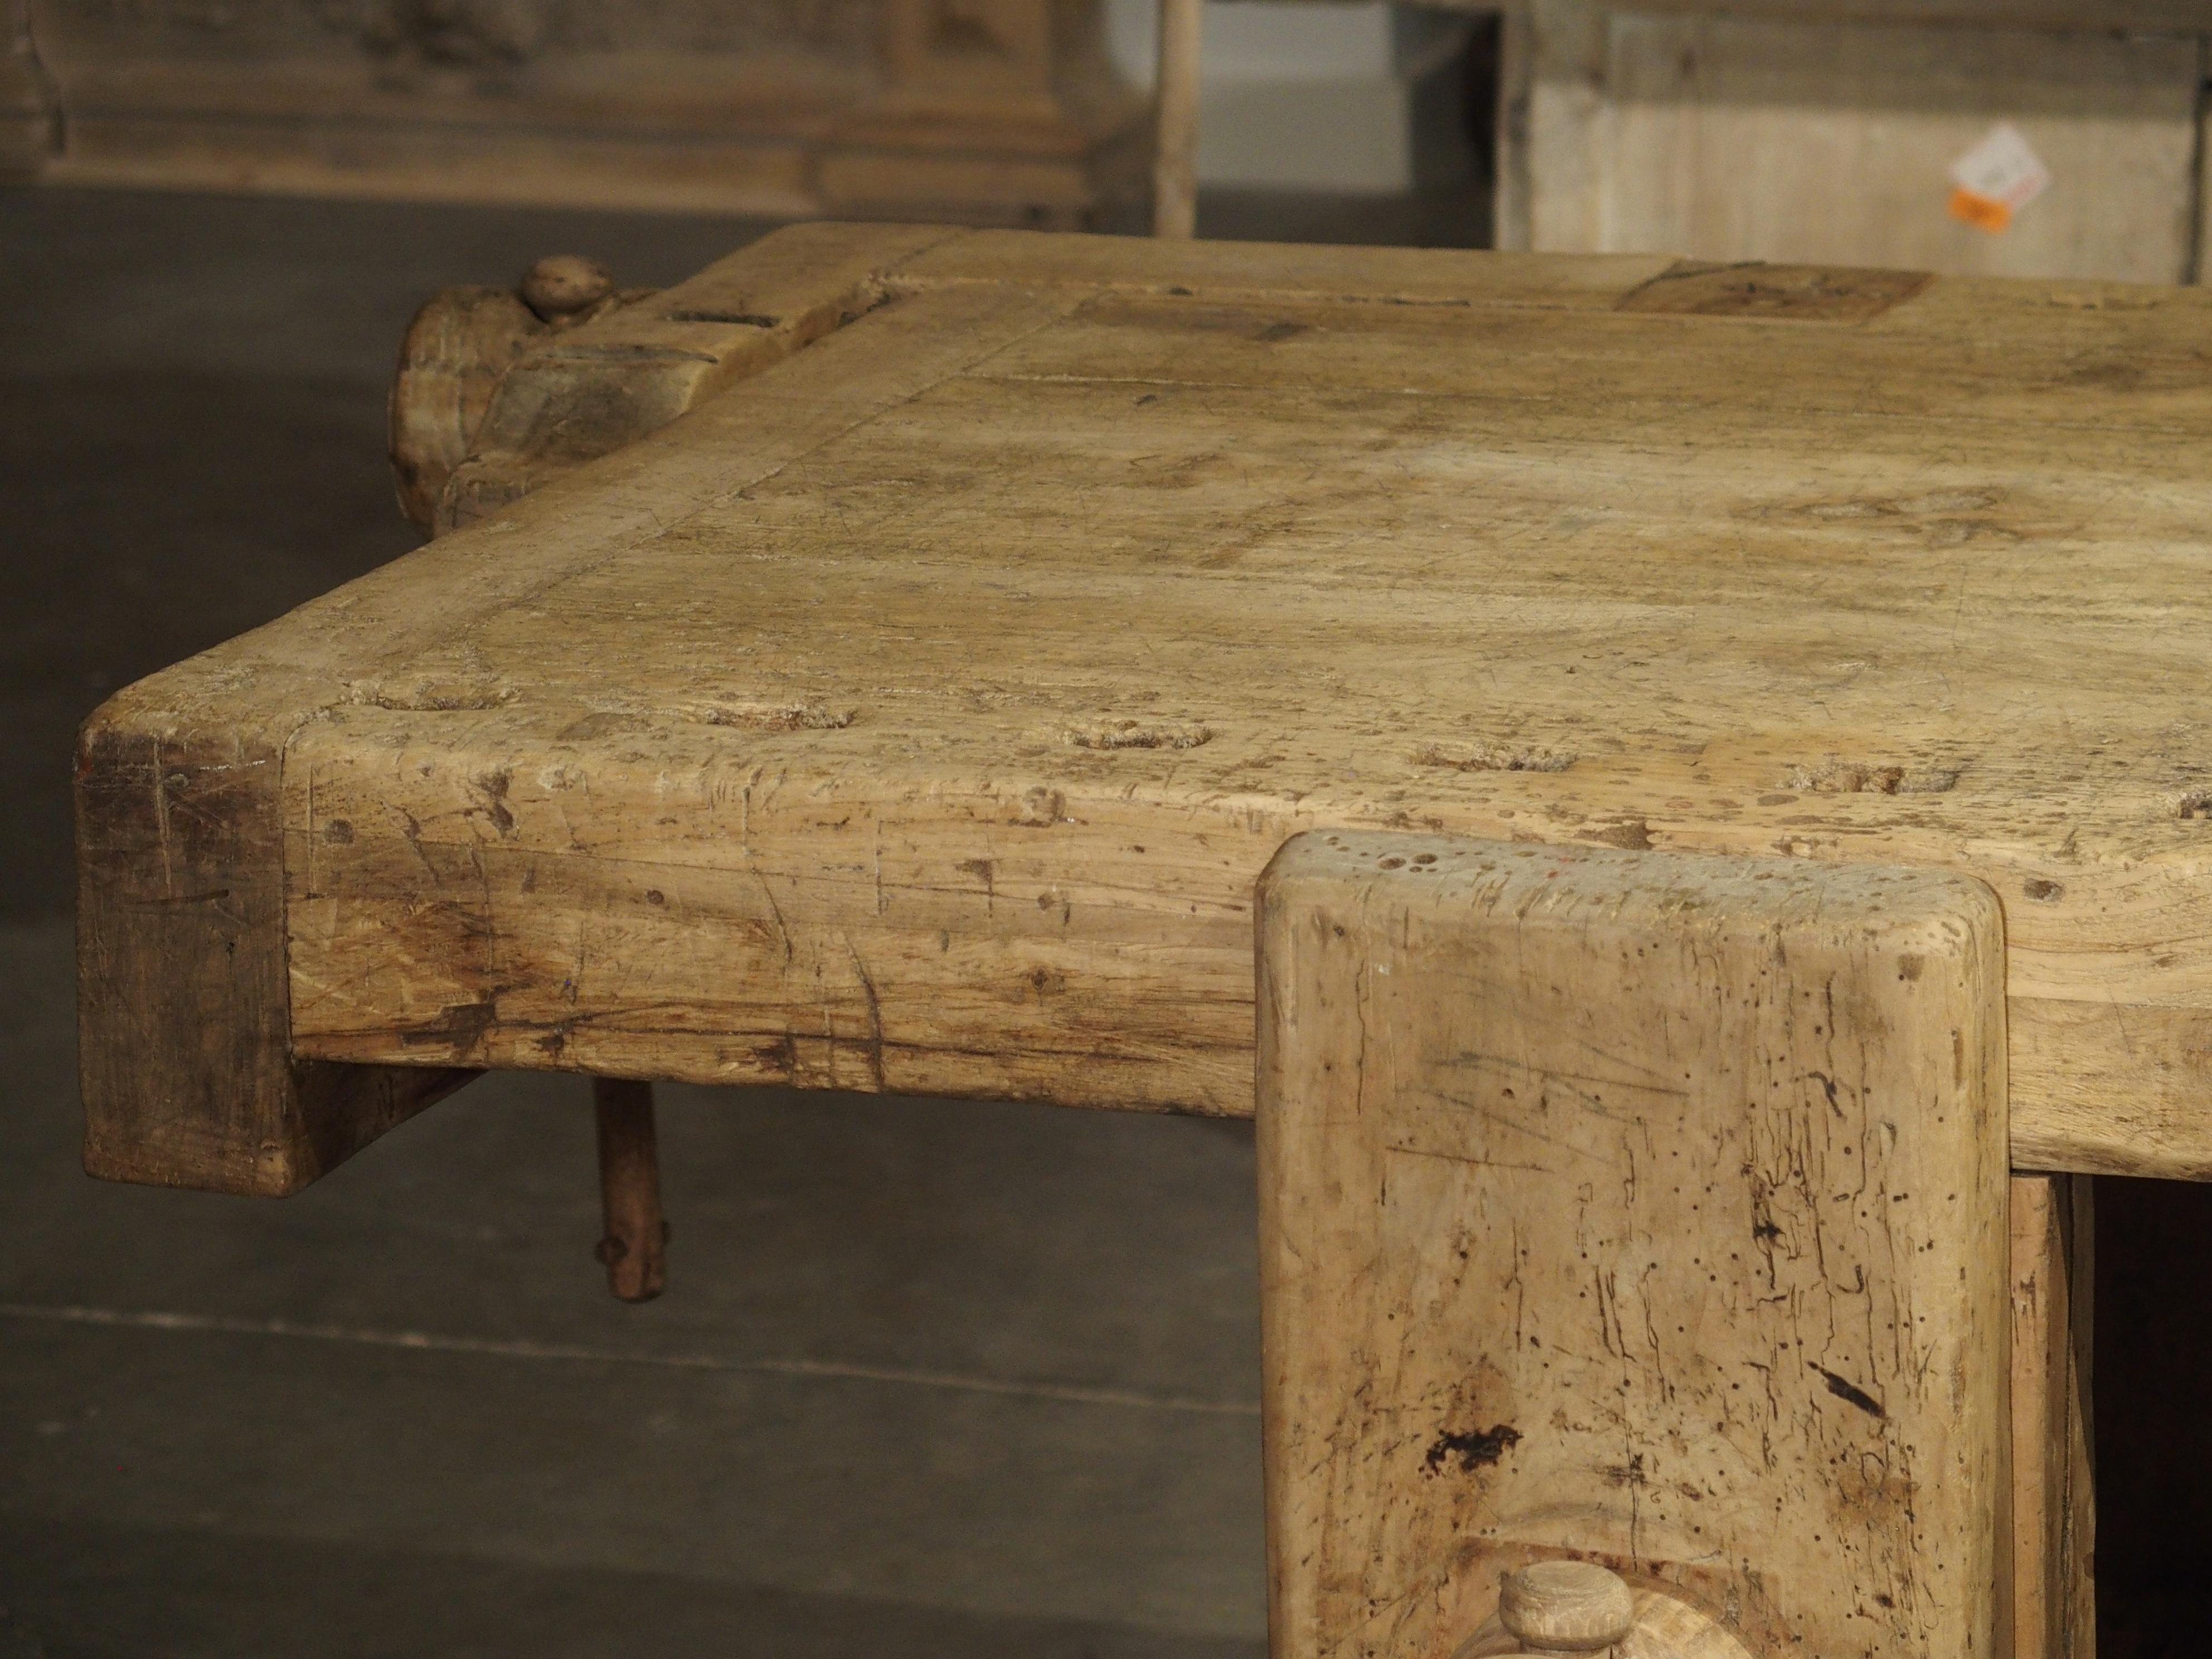 This fabulous antique Tuscan work bench is over 9 feet long and just under 4 feet wide. It is largest table of this type that we have found, which makes it perfect for a kitchen island, large sofa table, or work table. Along the periphery of the top